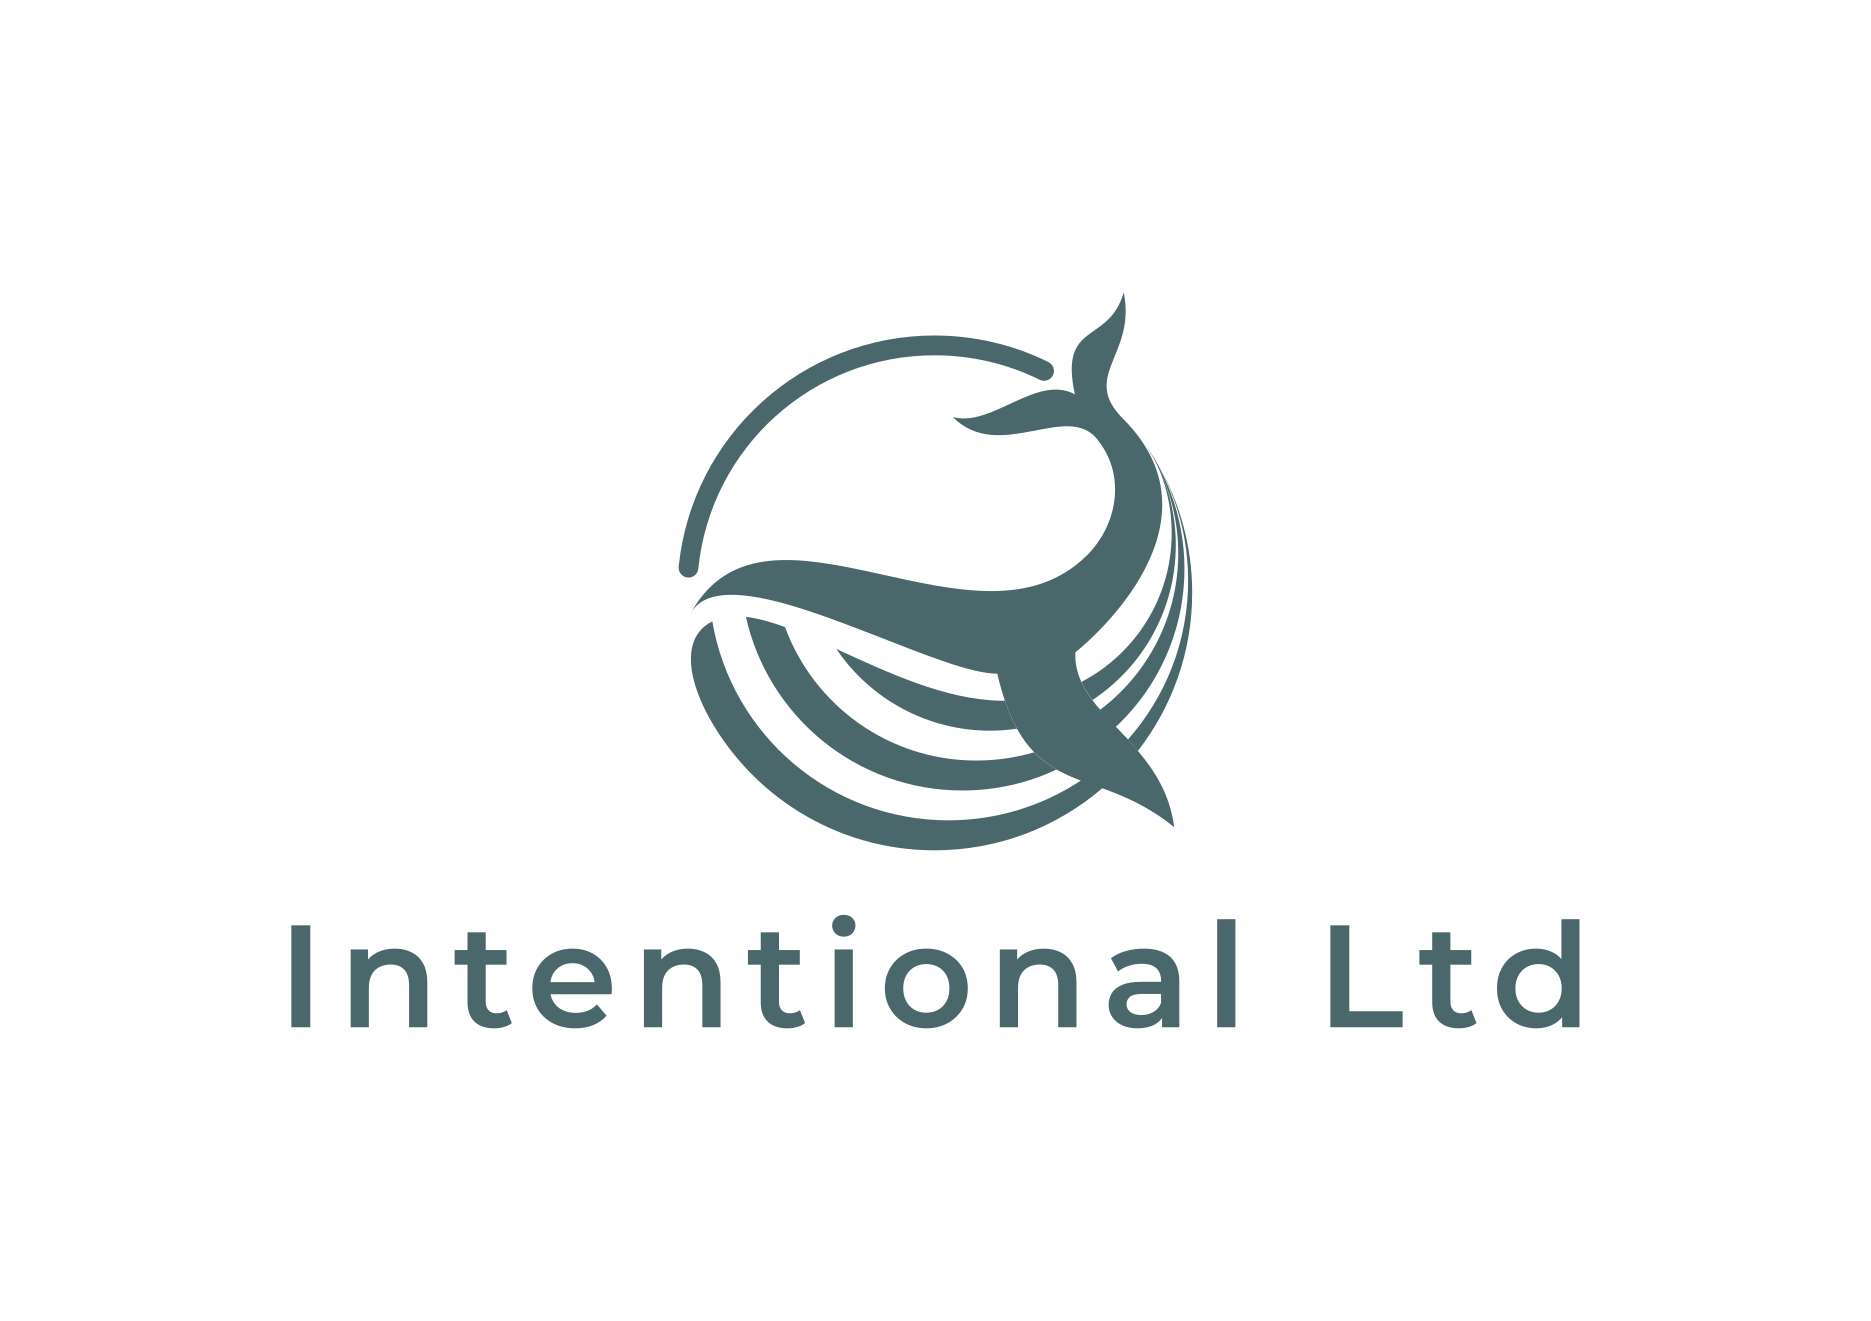 Brand Logo of a blue whale and text saying Intentional Ltd